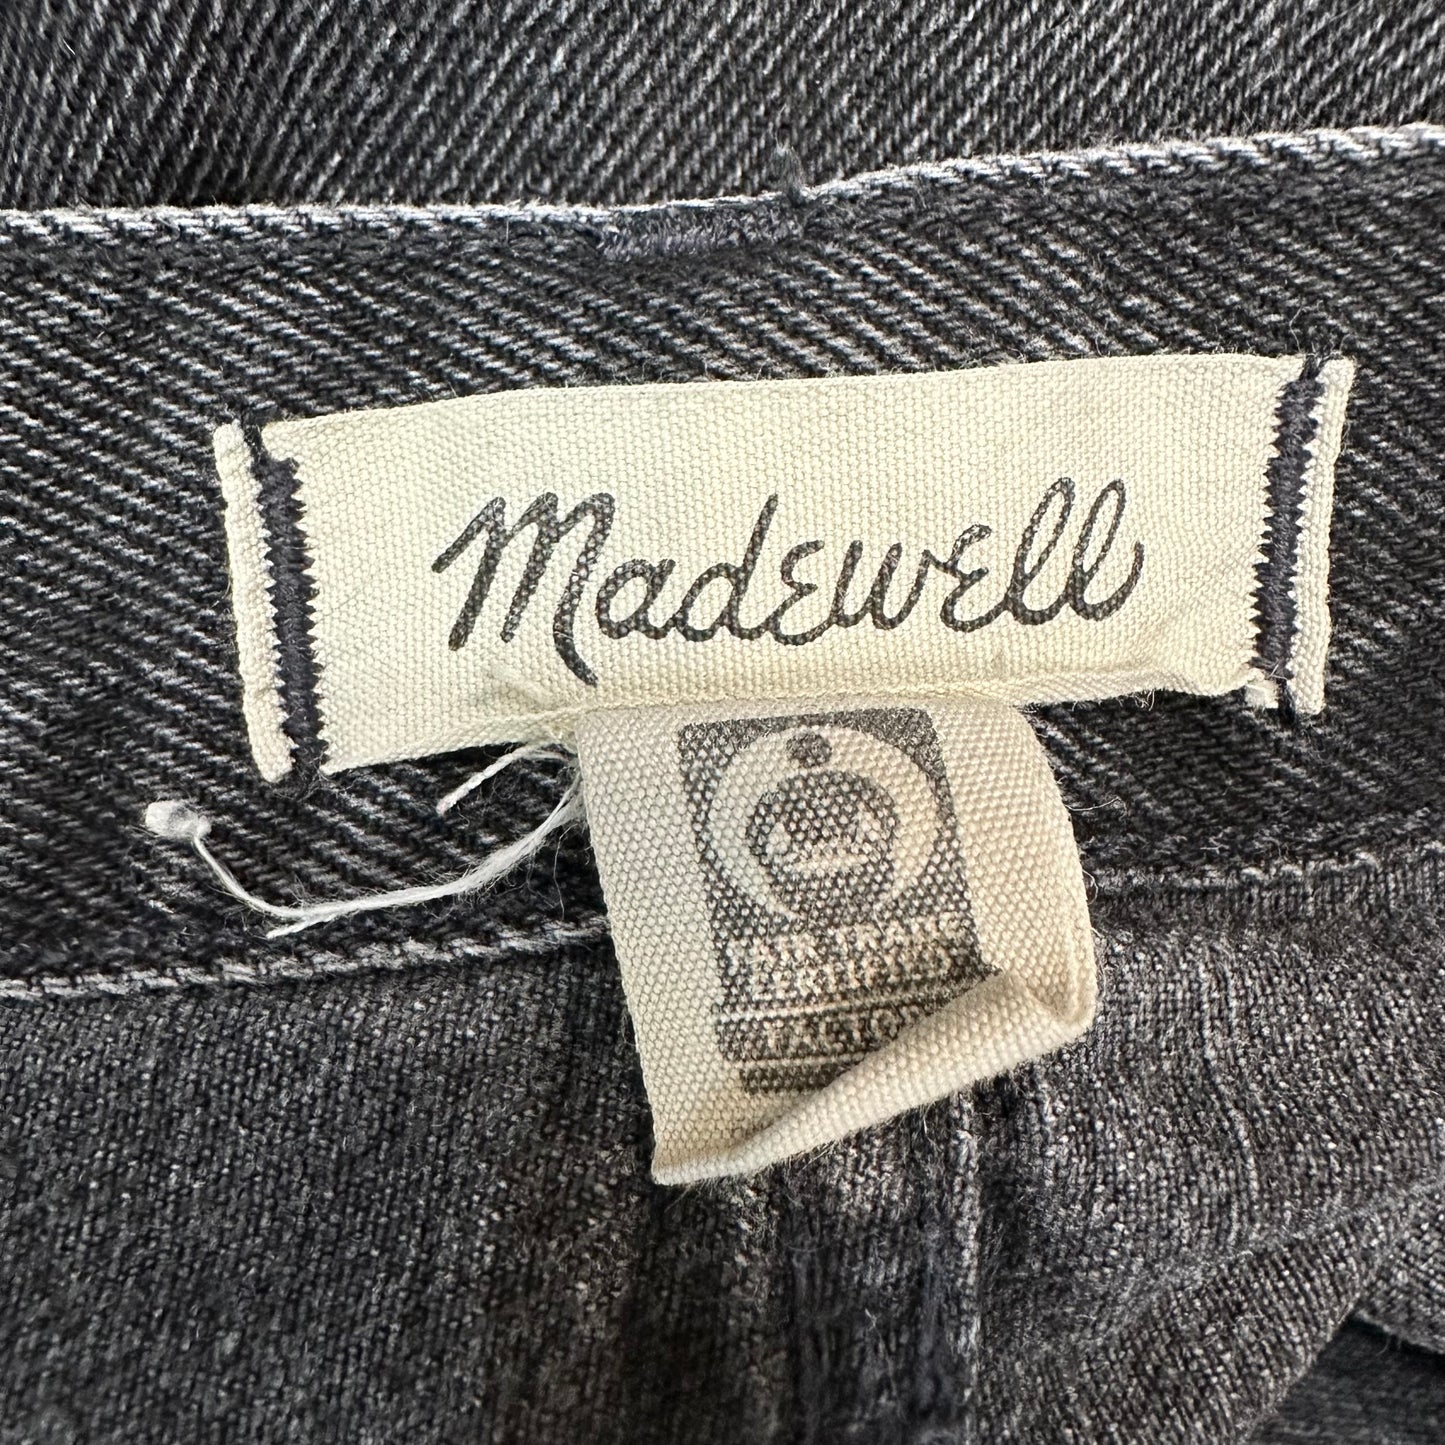 Madewell Baggy Straight Jeans Gray Black High Rise Cotton 26